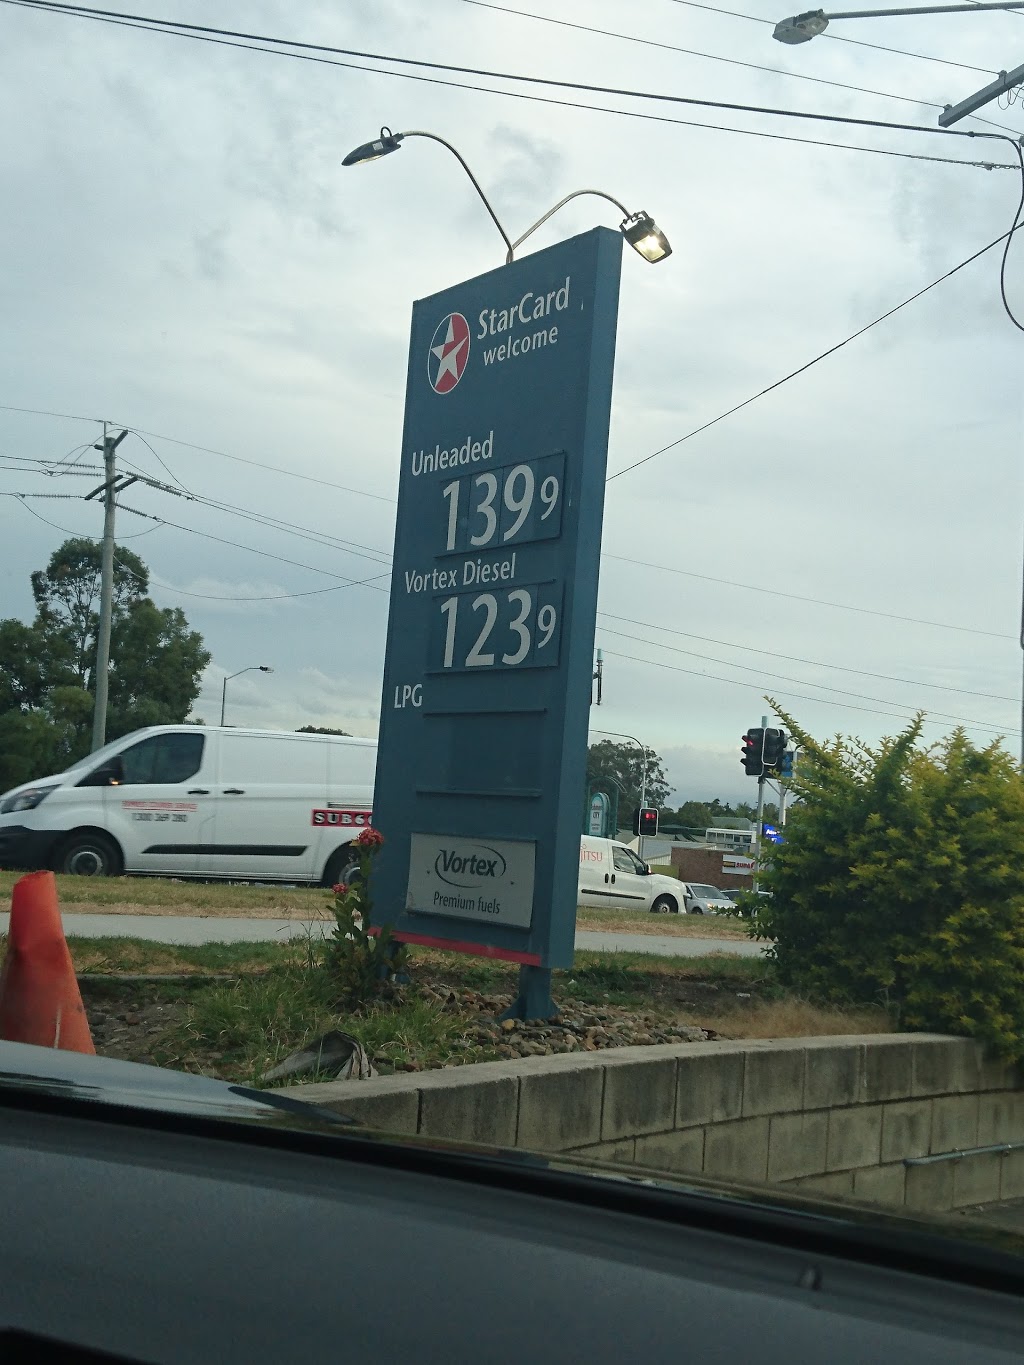 Caltex Ashmore | gas station | Olsen Ave, Cnr Southport Nerang Rd, Ashmore QLD 4214, Australia | 0755971966 OR +61 7 5597 1966